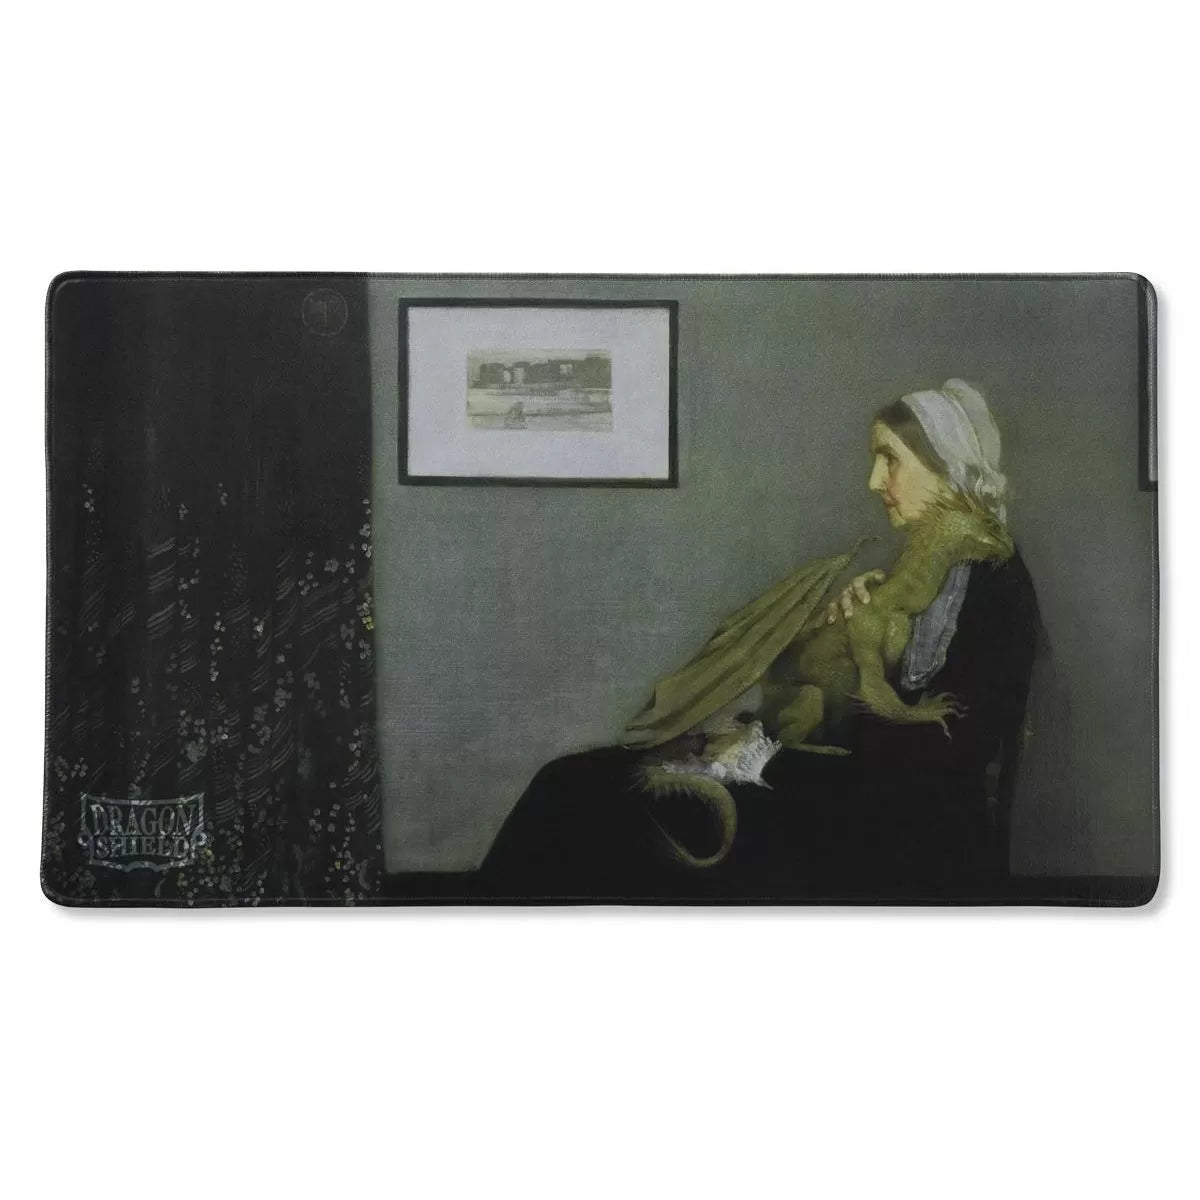 Playmat - Dragon Shield - Whistlers Mother